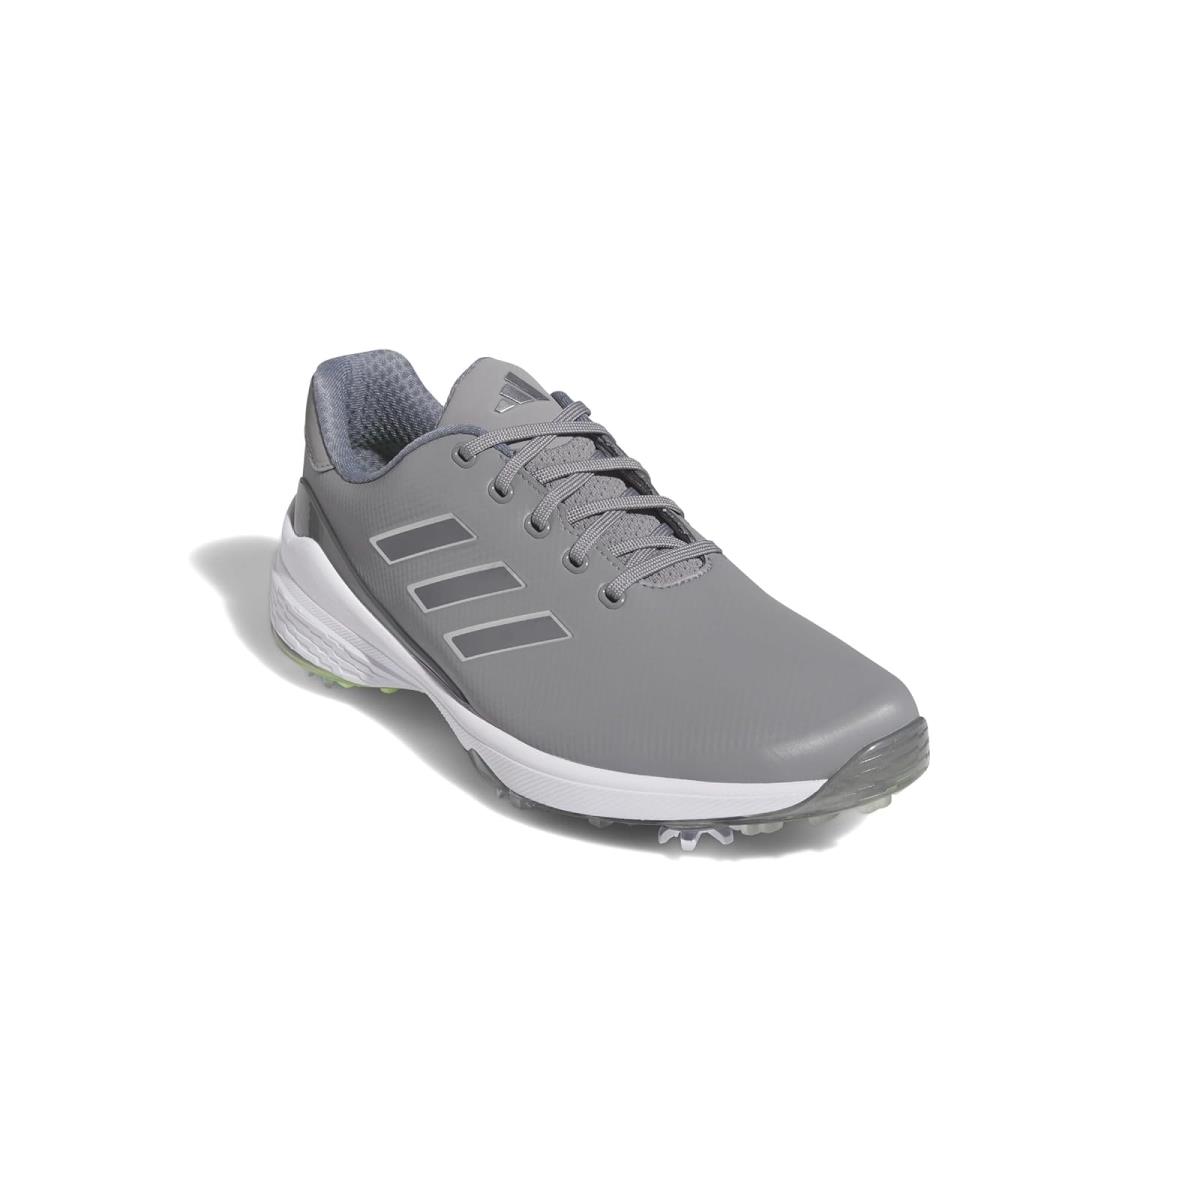 Man`s Sneakers Athletic Shoes Adidas Golf ZG23 Greythree/Ironmet/Silvermet